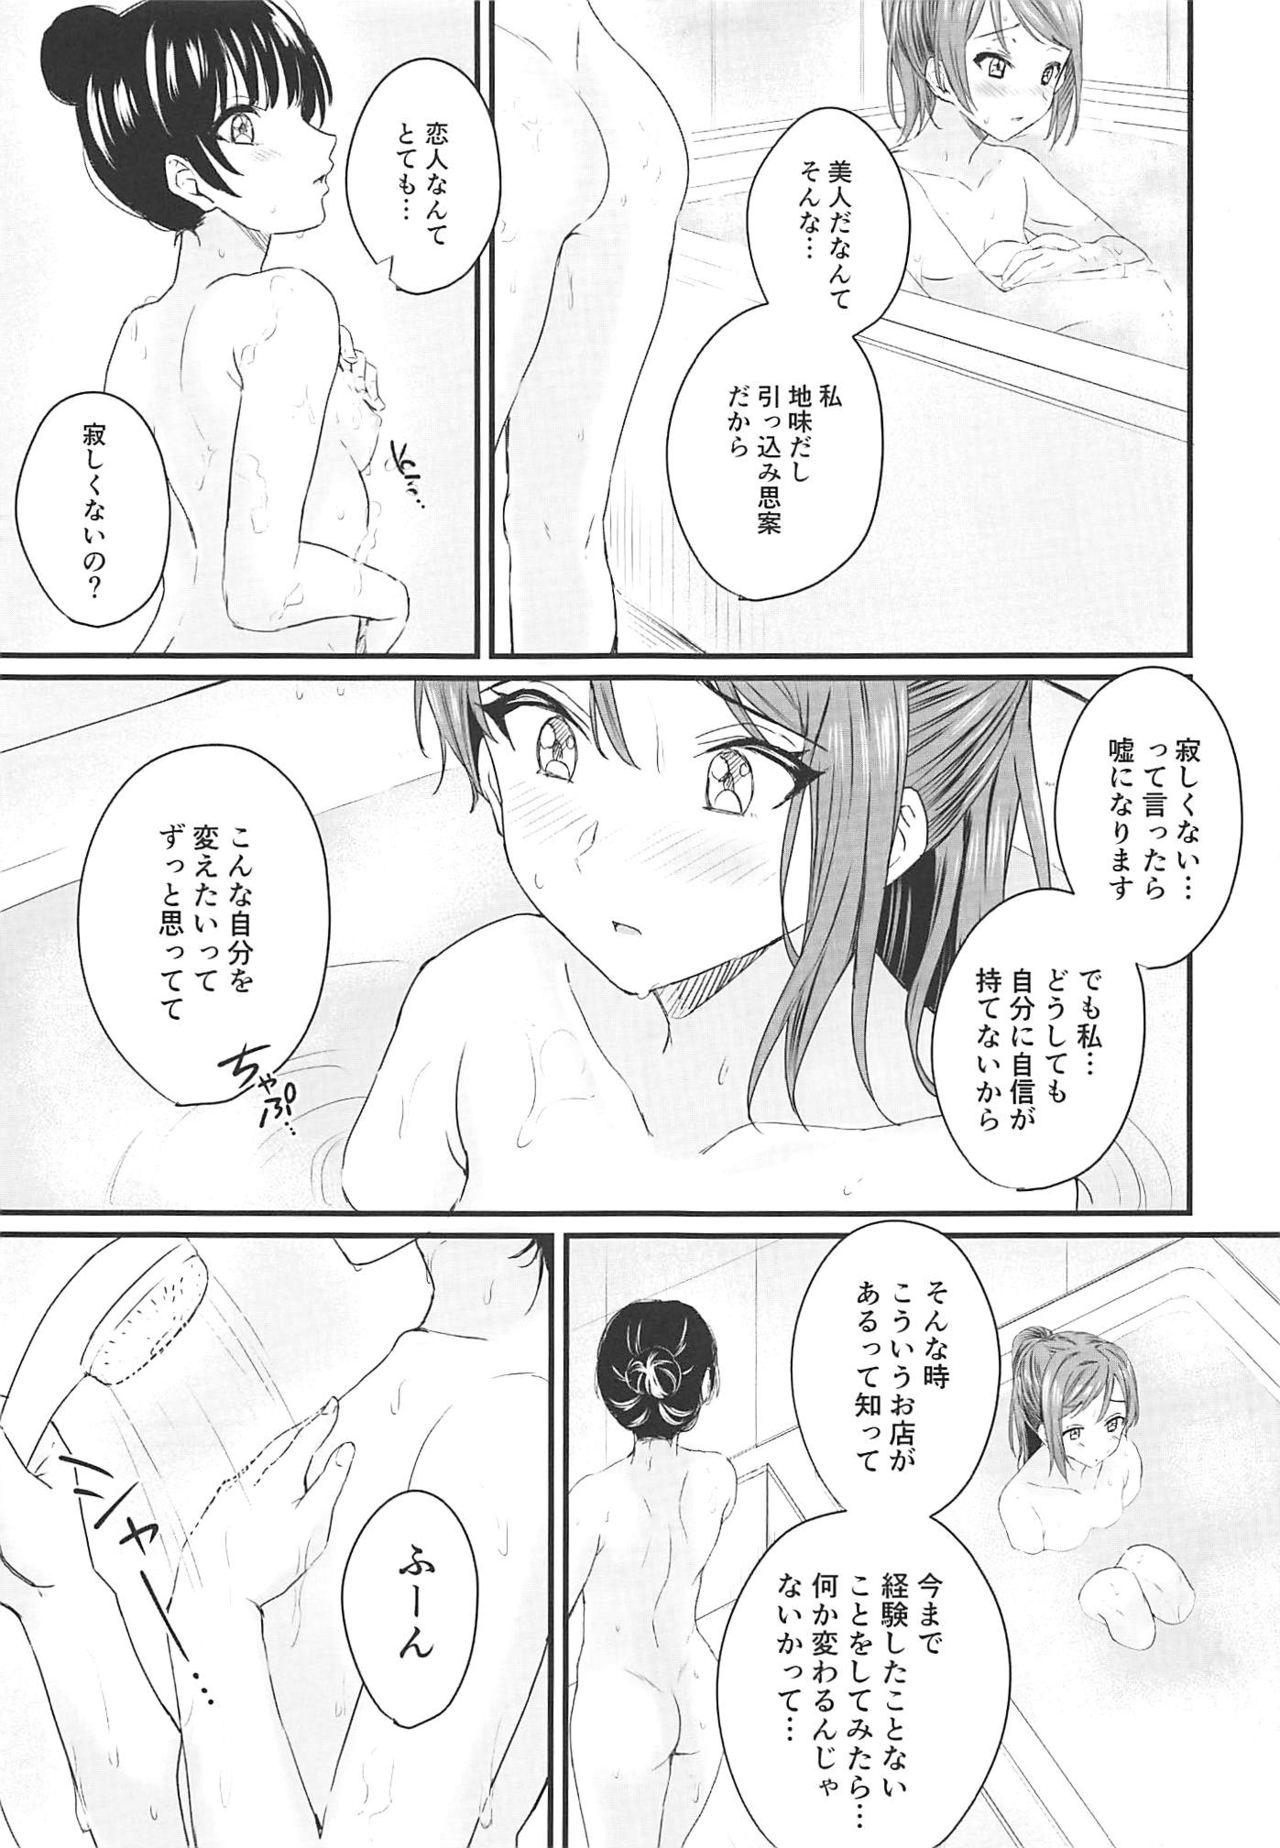 Indo INSTANT LOVE STORY - Love live sunshine Farting - Page 6